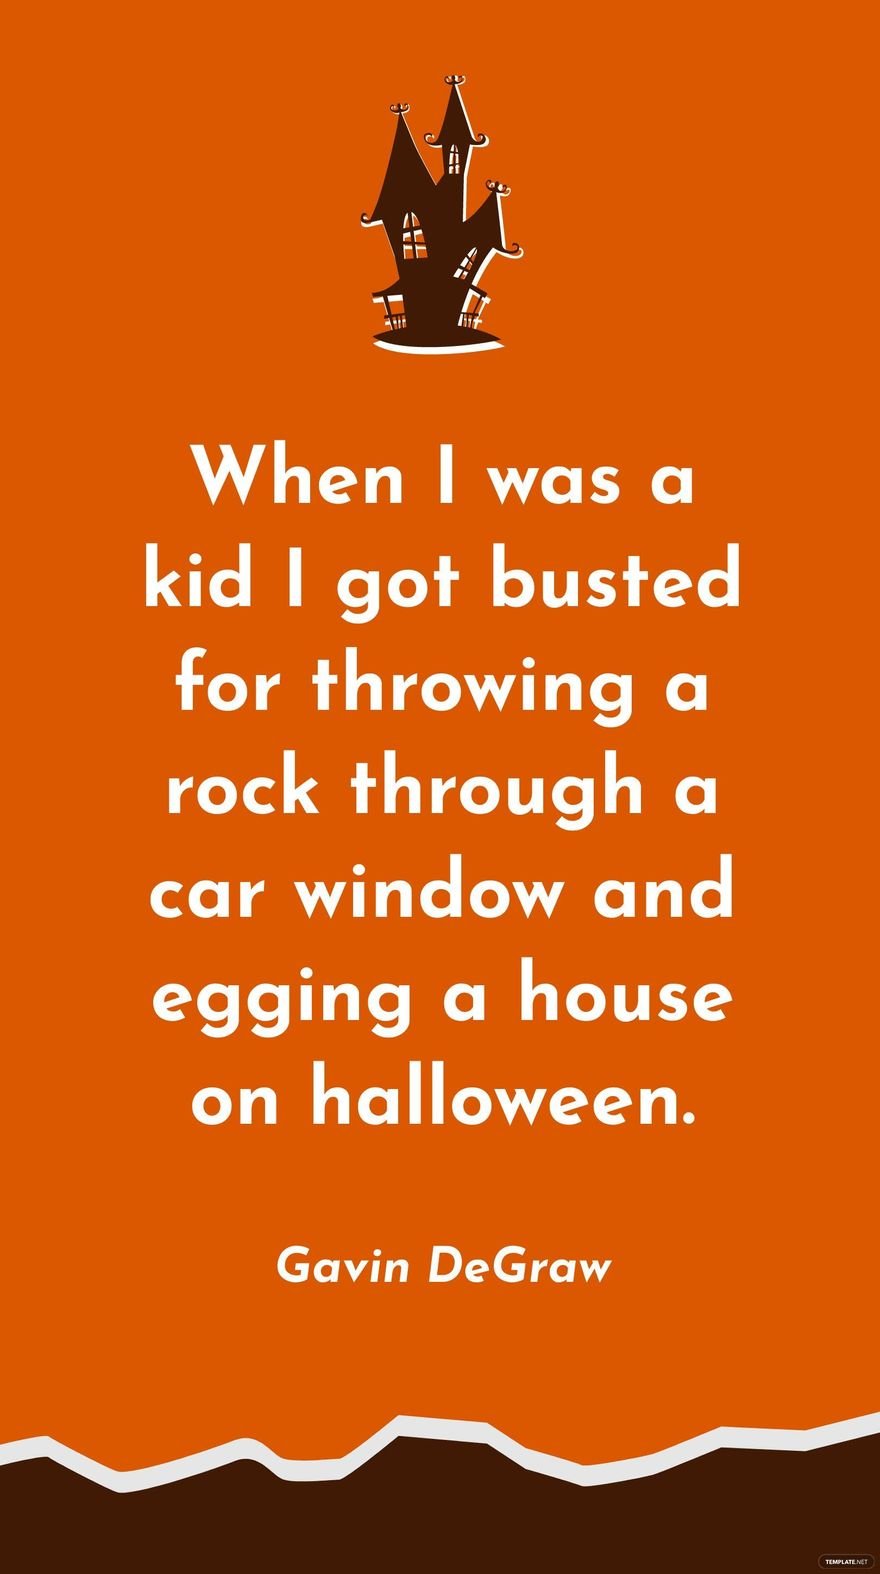 Free Gavin DeGraw - When I was a kid I got busted for throwing a rock through a car window and egging a house on halloween.